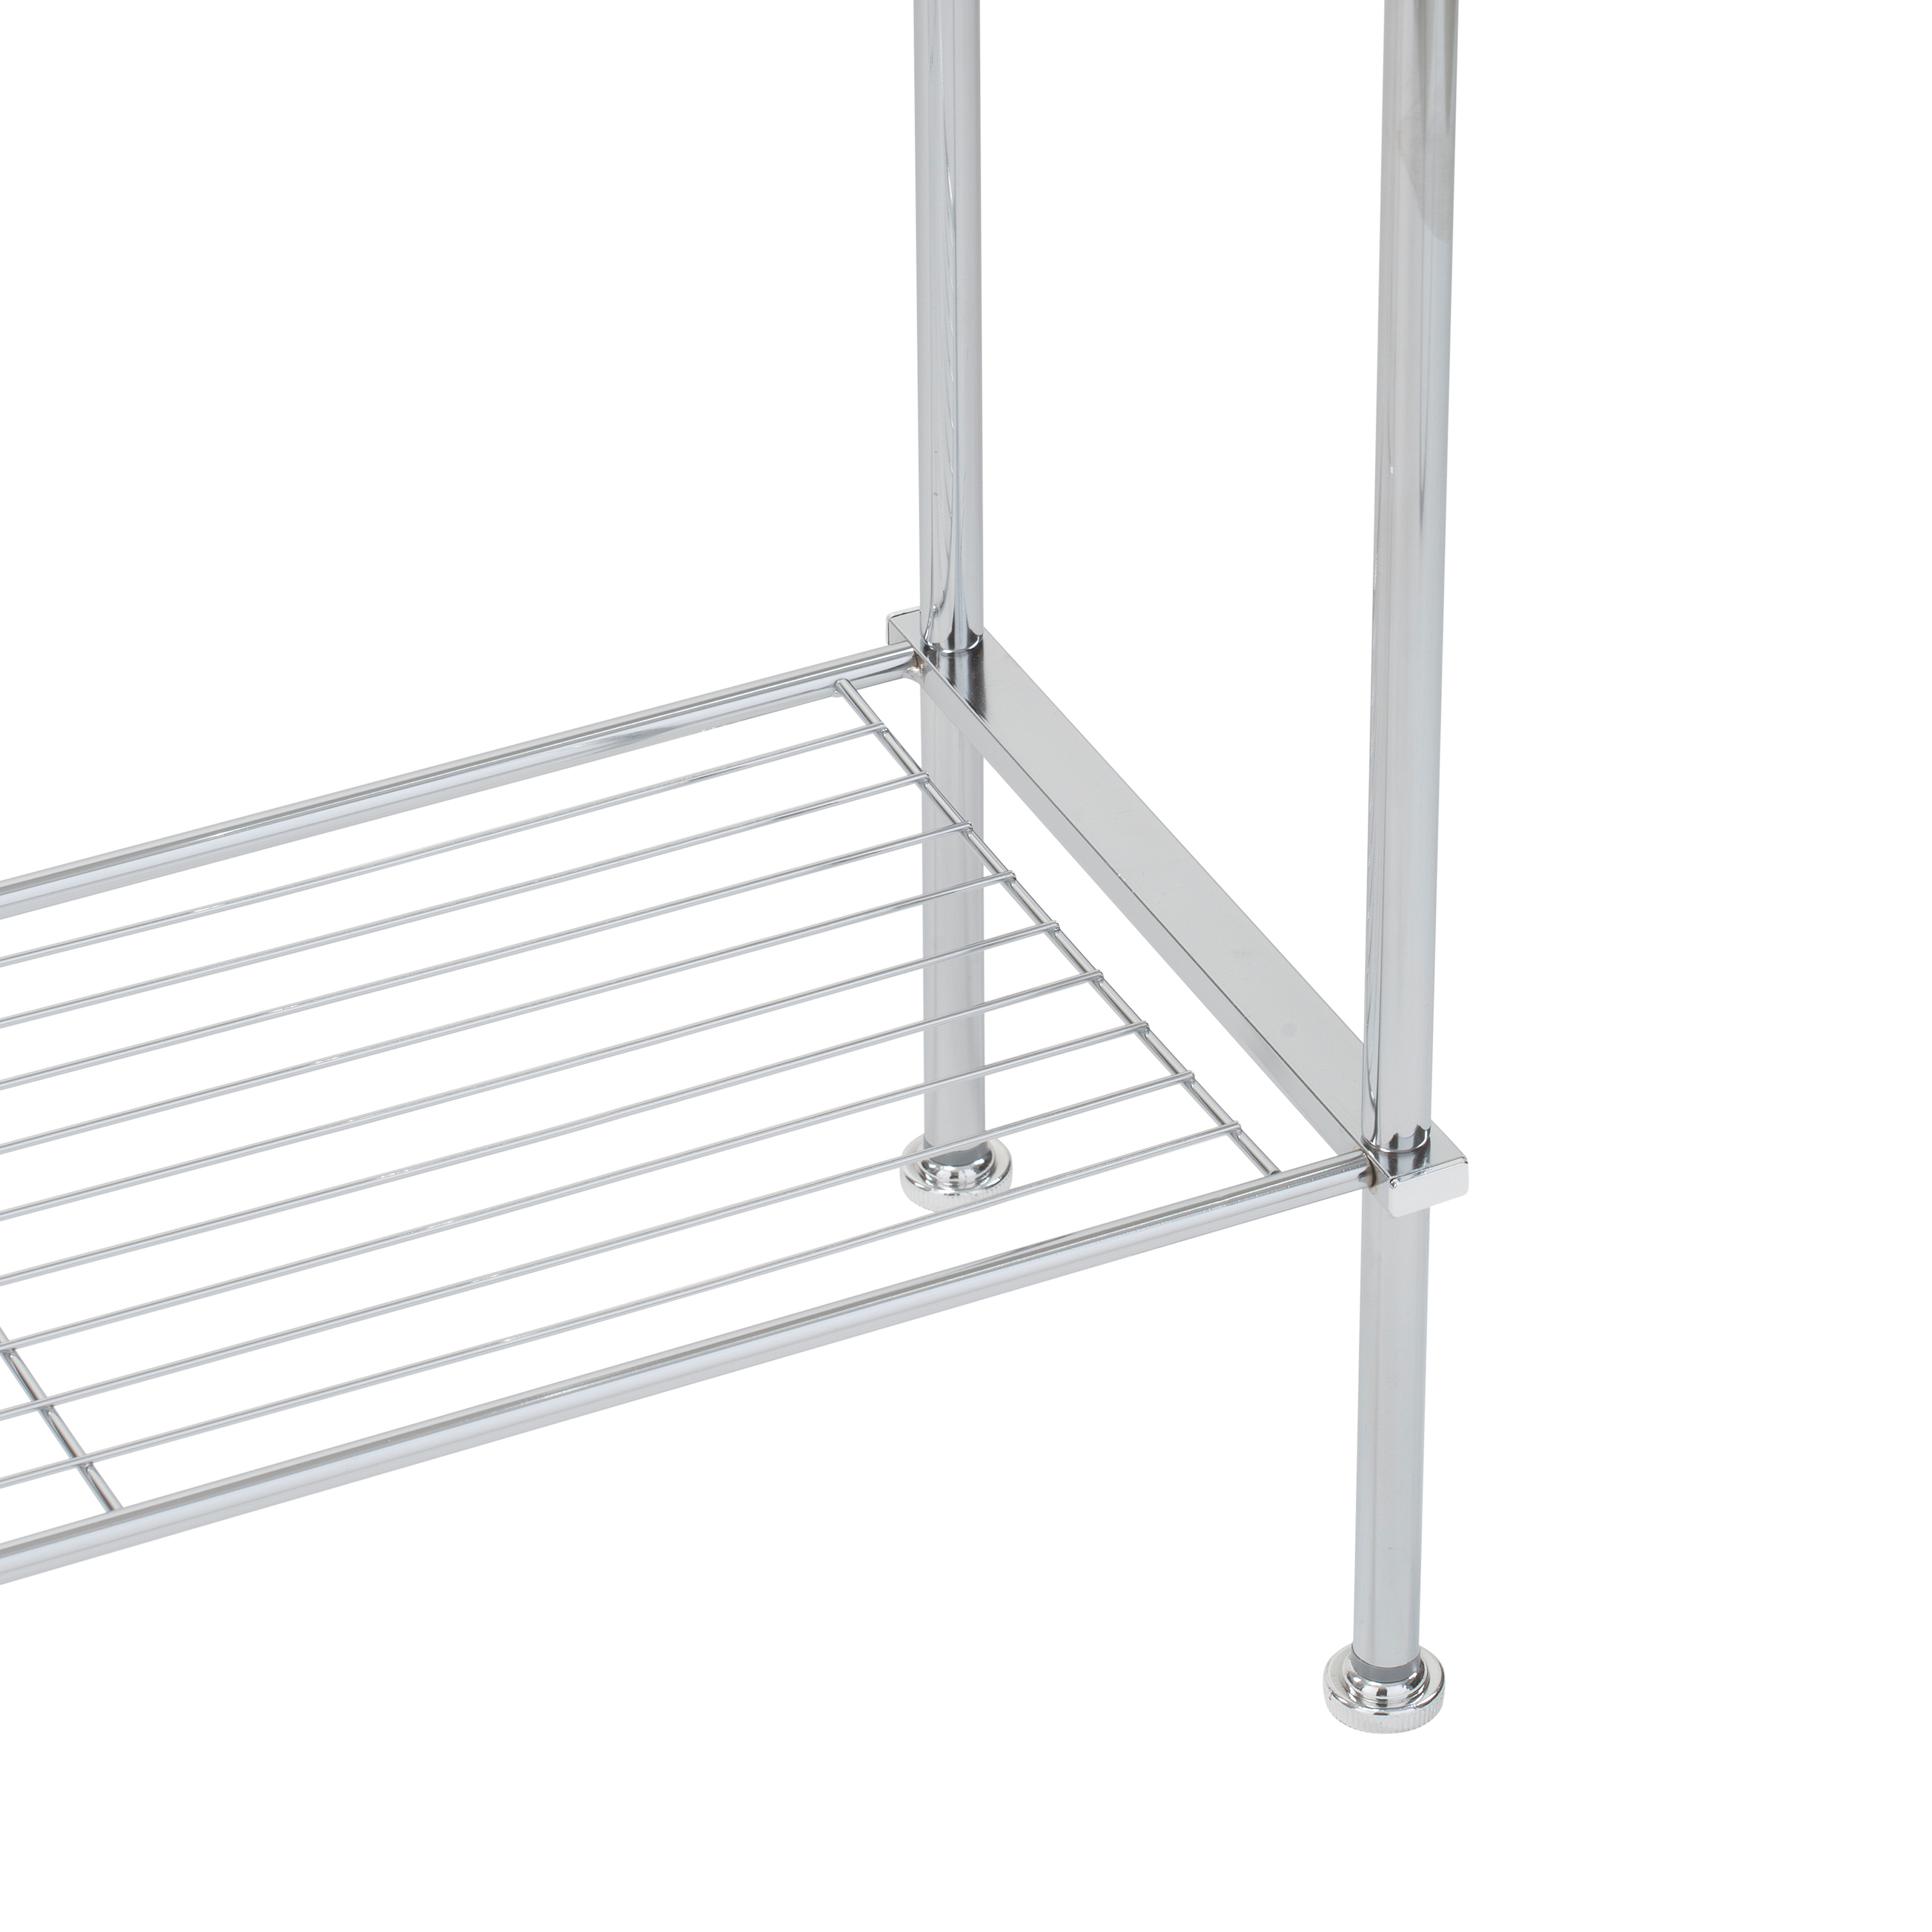 Organize It All Freestanding Metal Towel Rack in Chrome - image 3 of 7